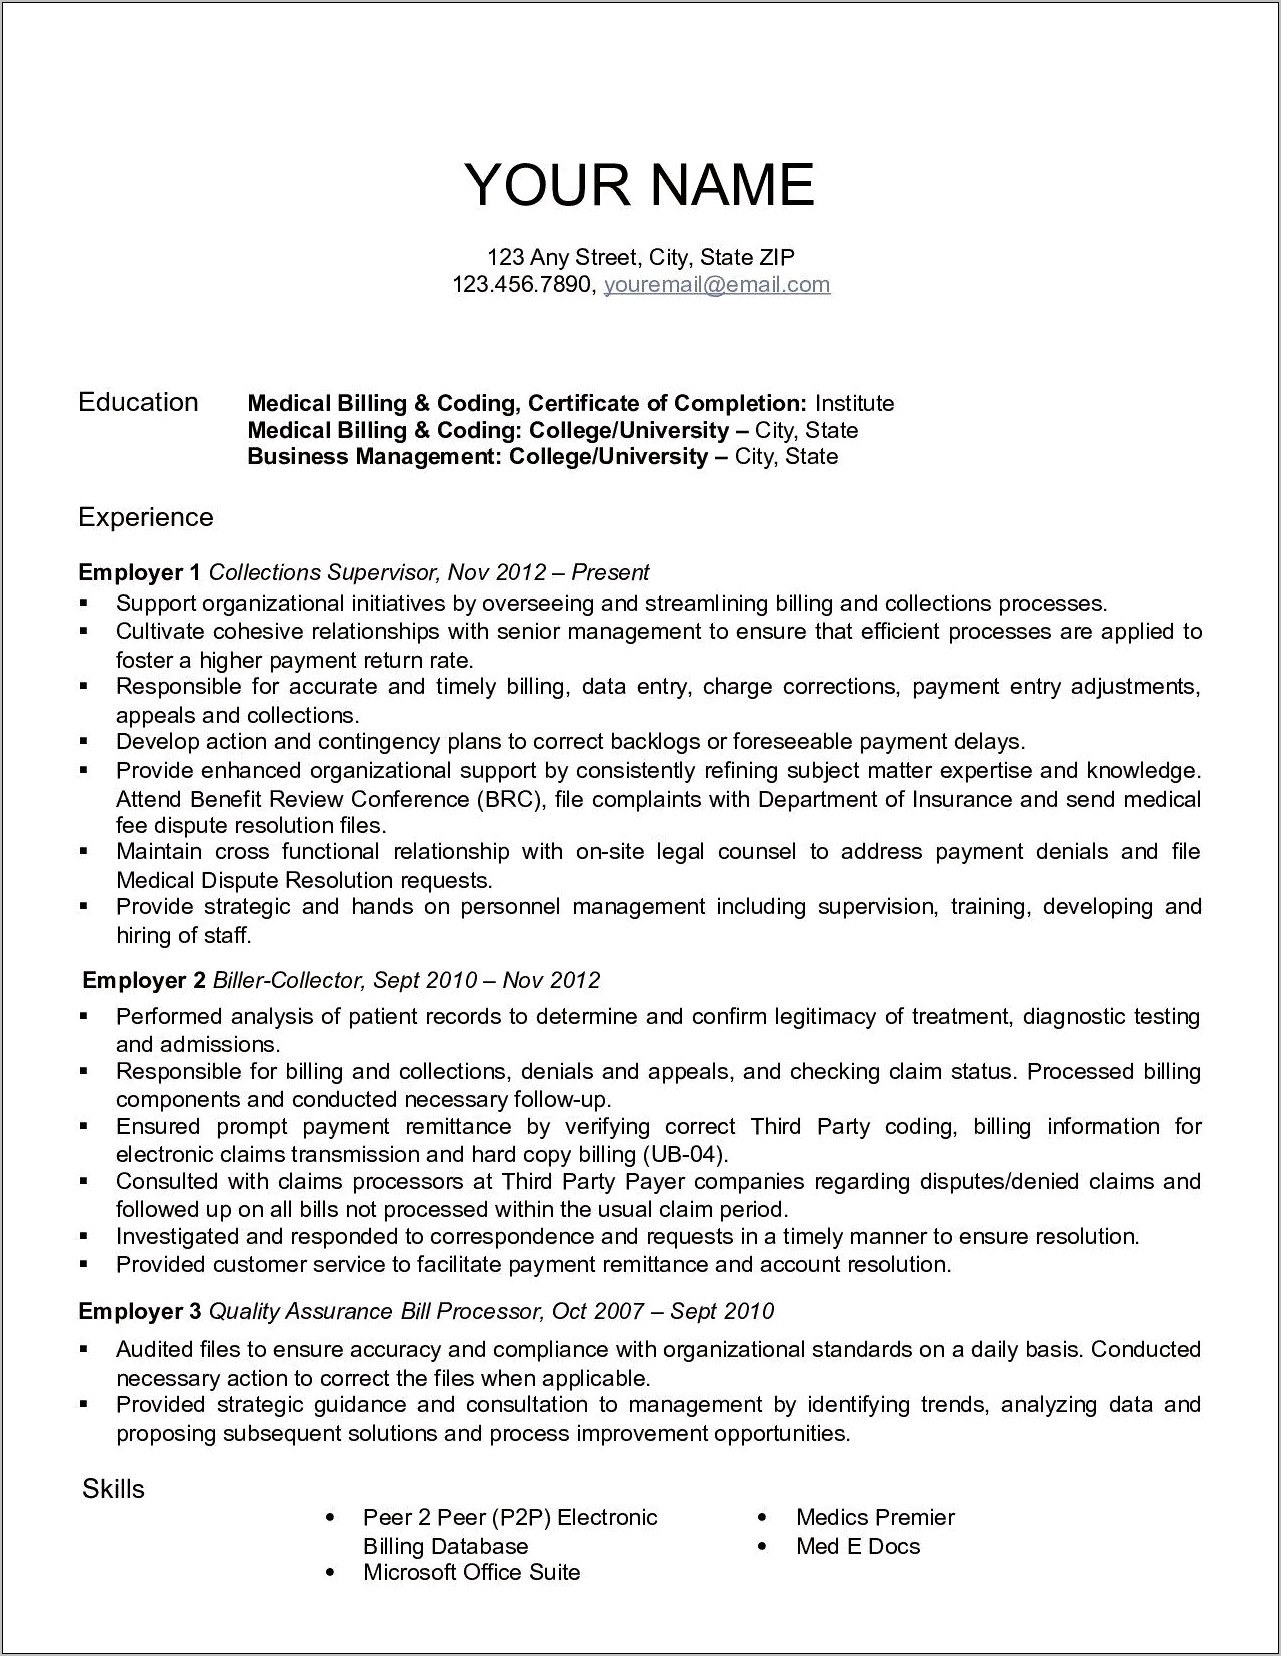 Sample Of Interview Medical Coding And Billing Resume